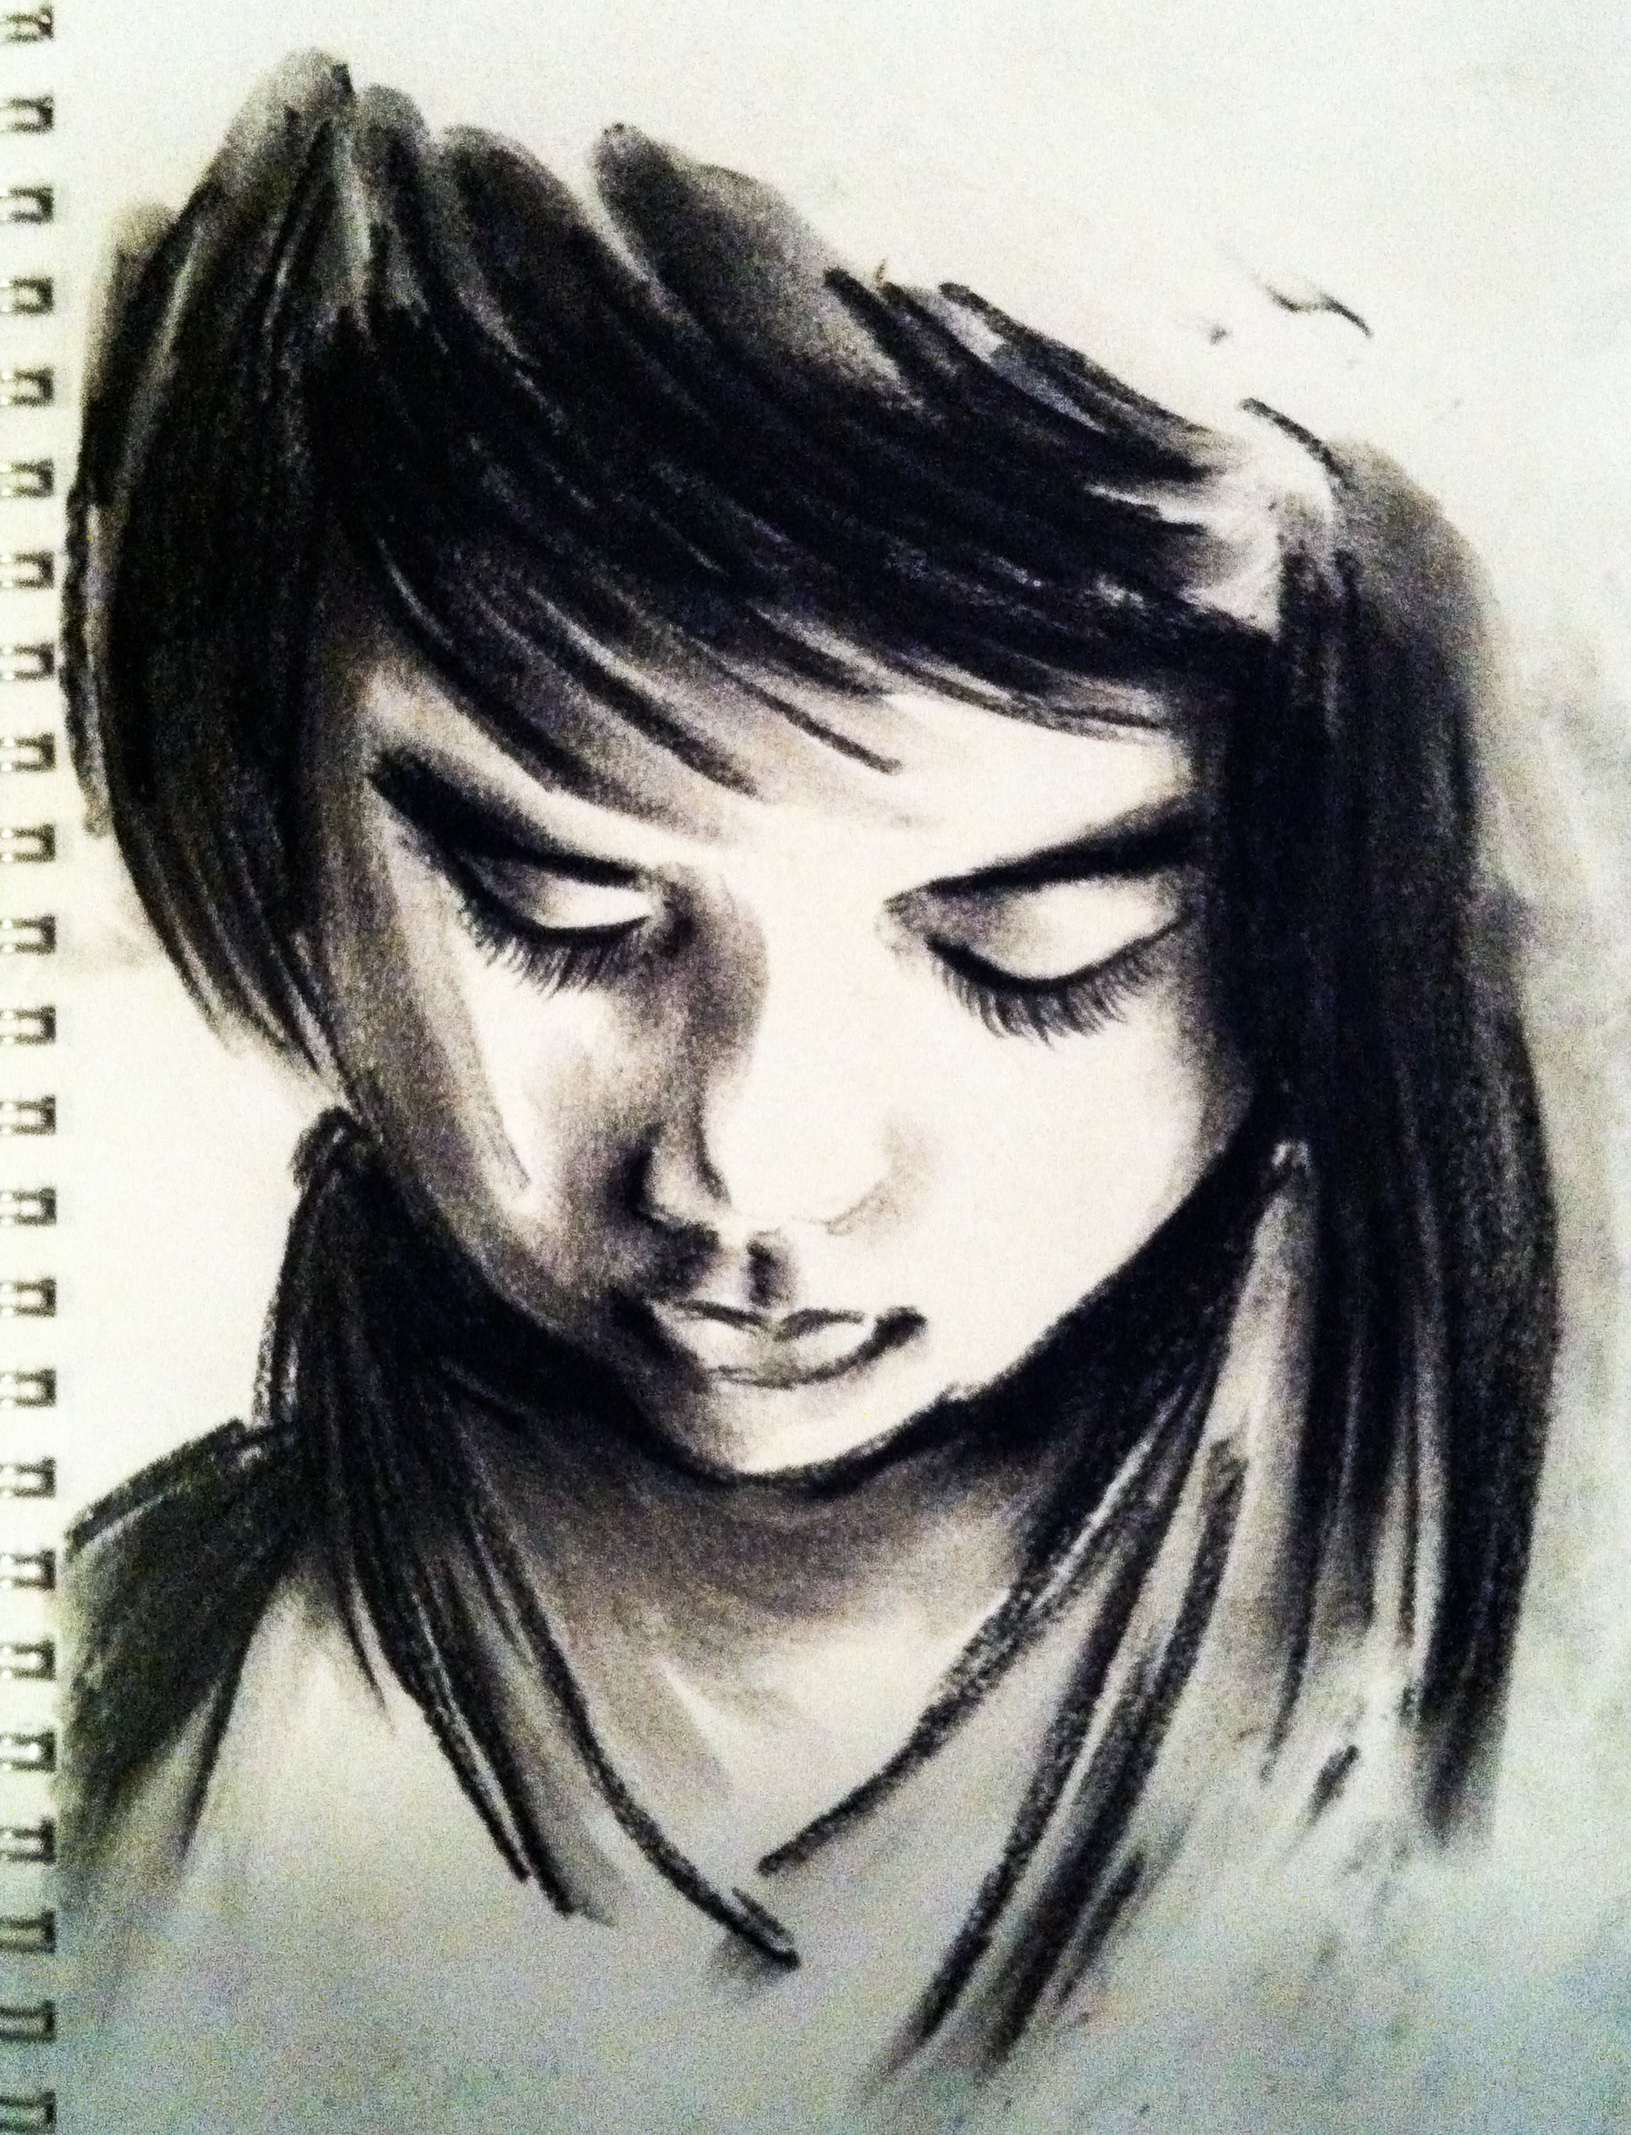 CHARCOAL SKETCHES :: Behance